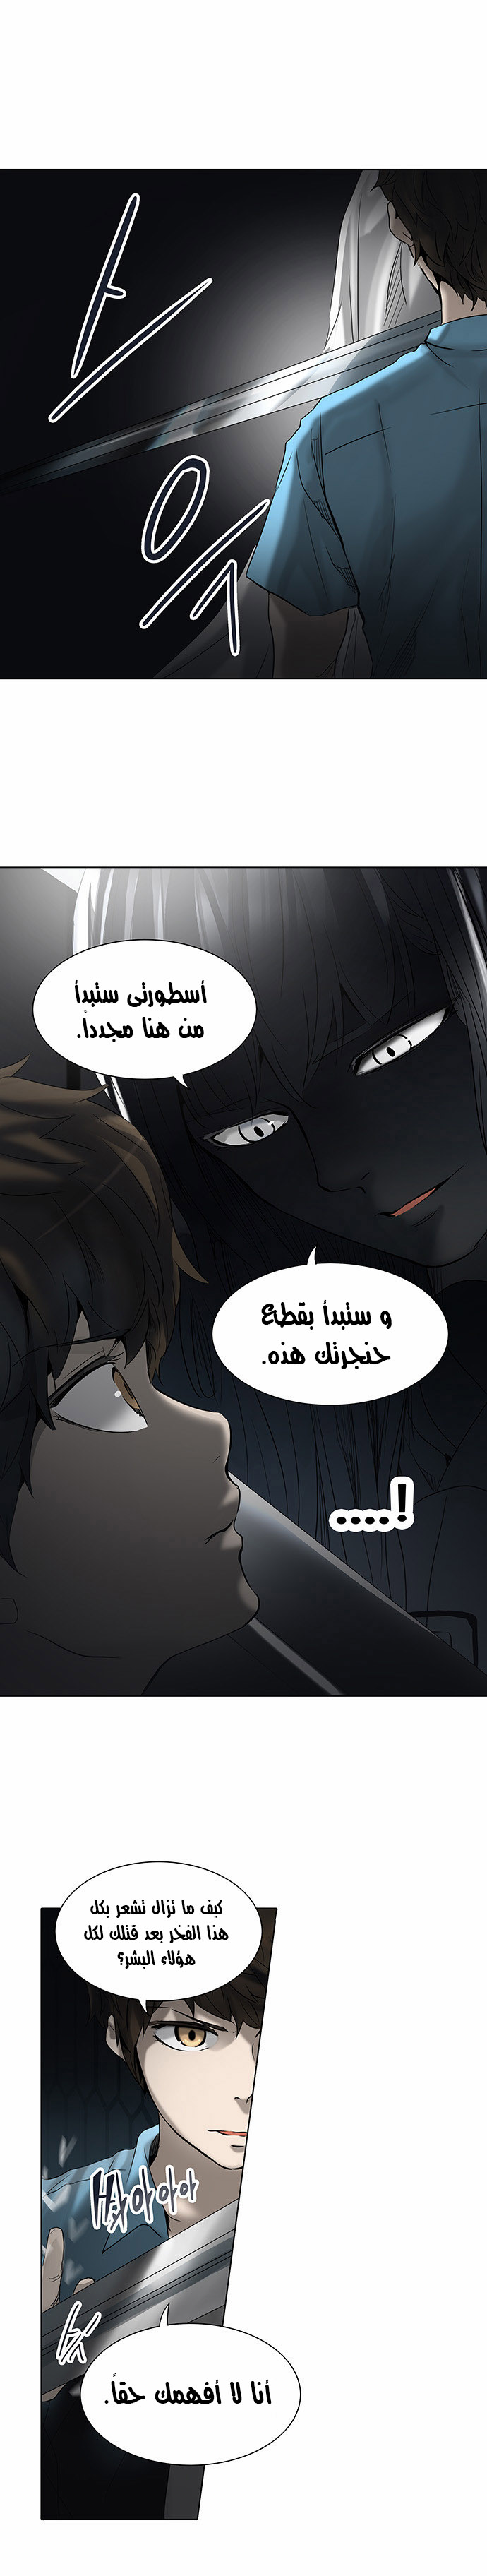 Tower of God 2: Chapter 185 - Page 1